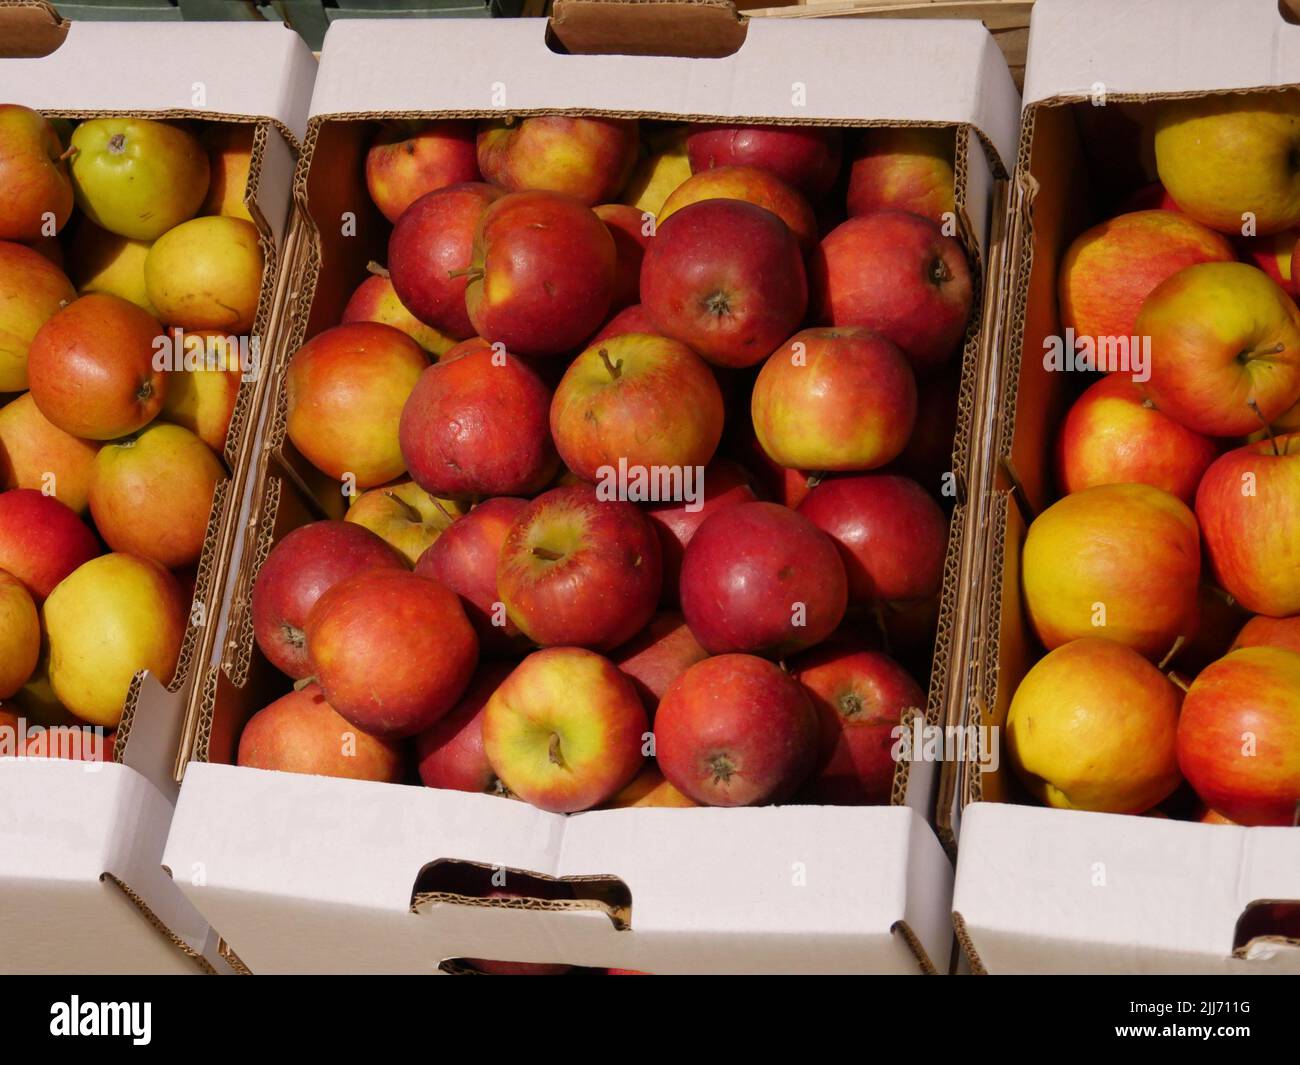 red yellow ripe apples, sort 2nd choice, that means with slight damage to the apple peel. Presented in white cardboard boxes, lying out for sale Stock Photo